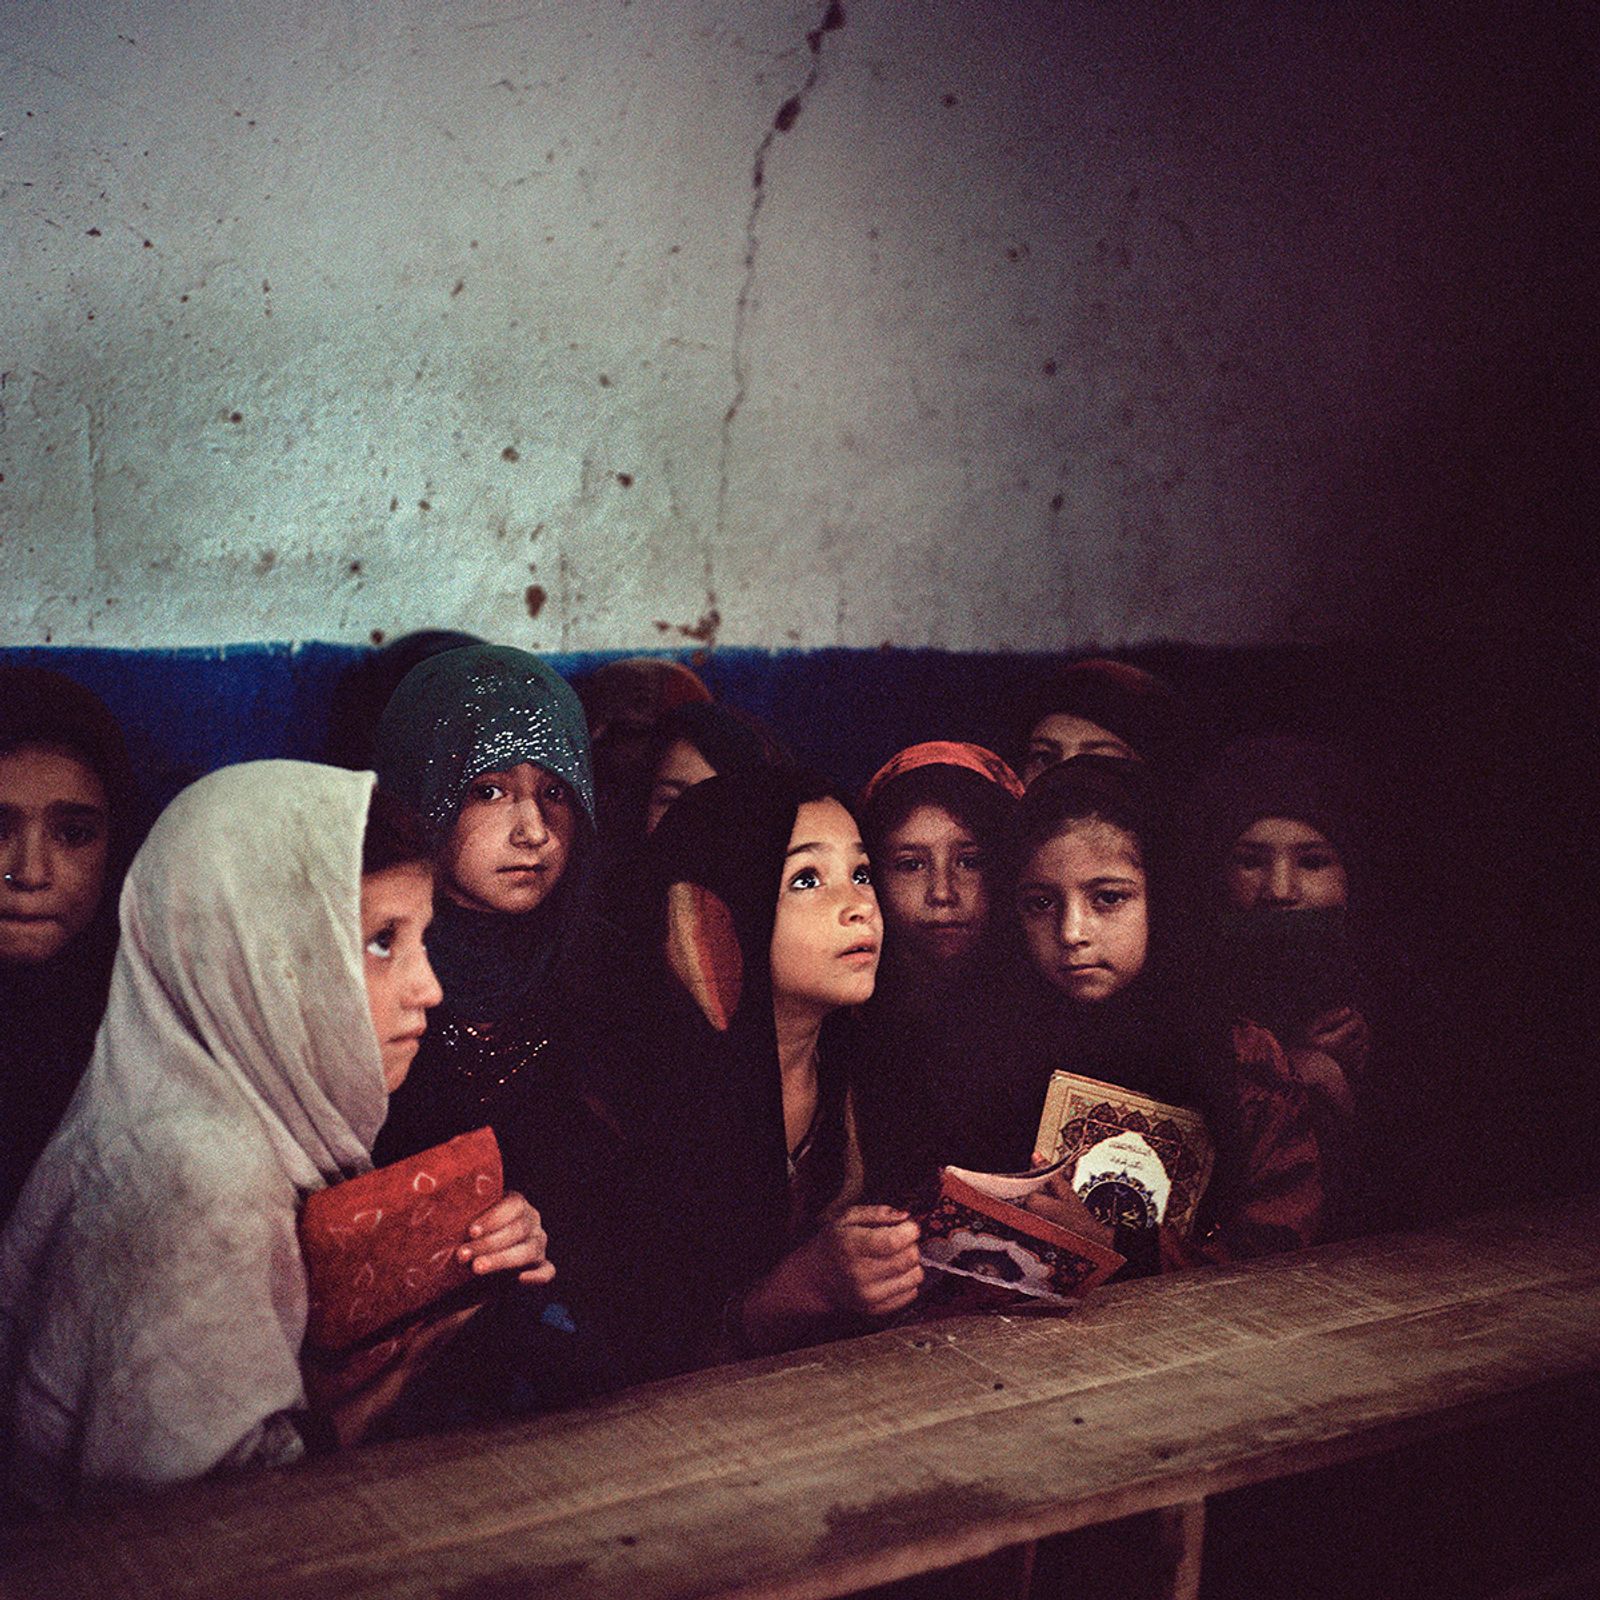 © Sara Hylton - Image from the The Rising Voices of Women in Pakistan photography project